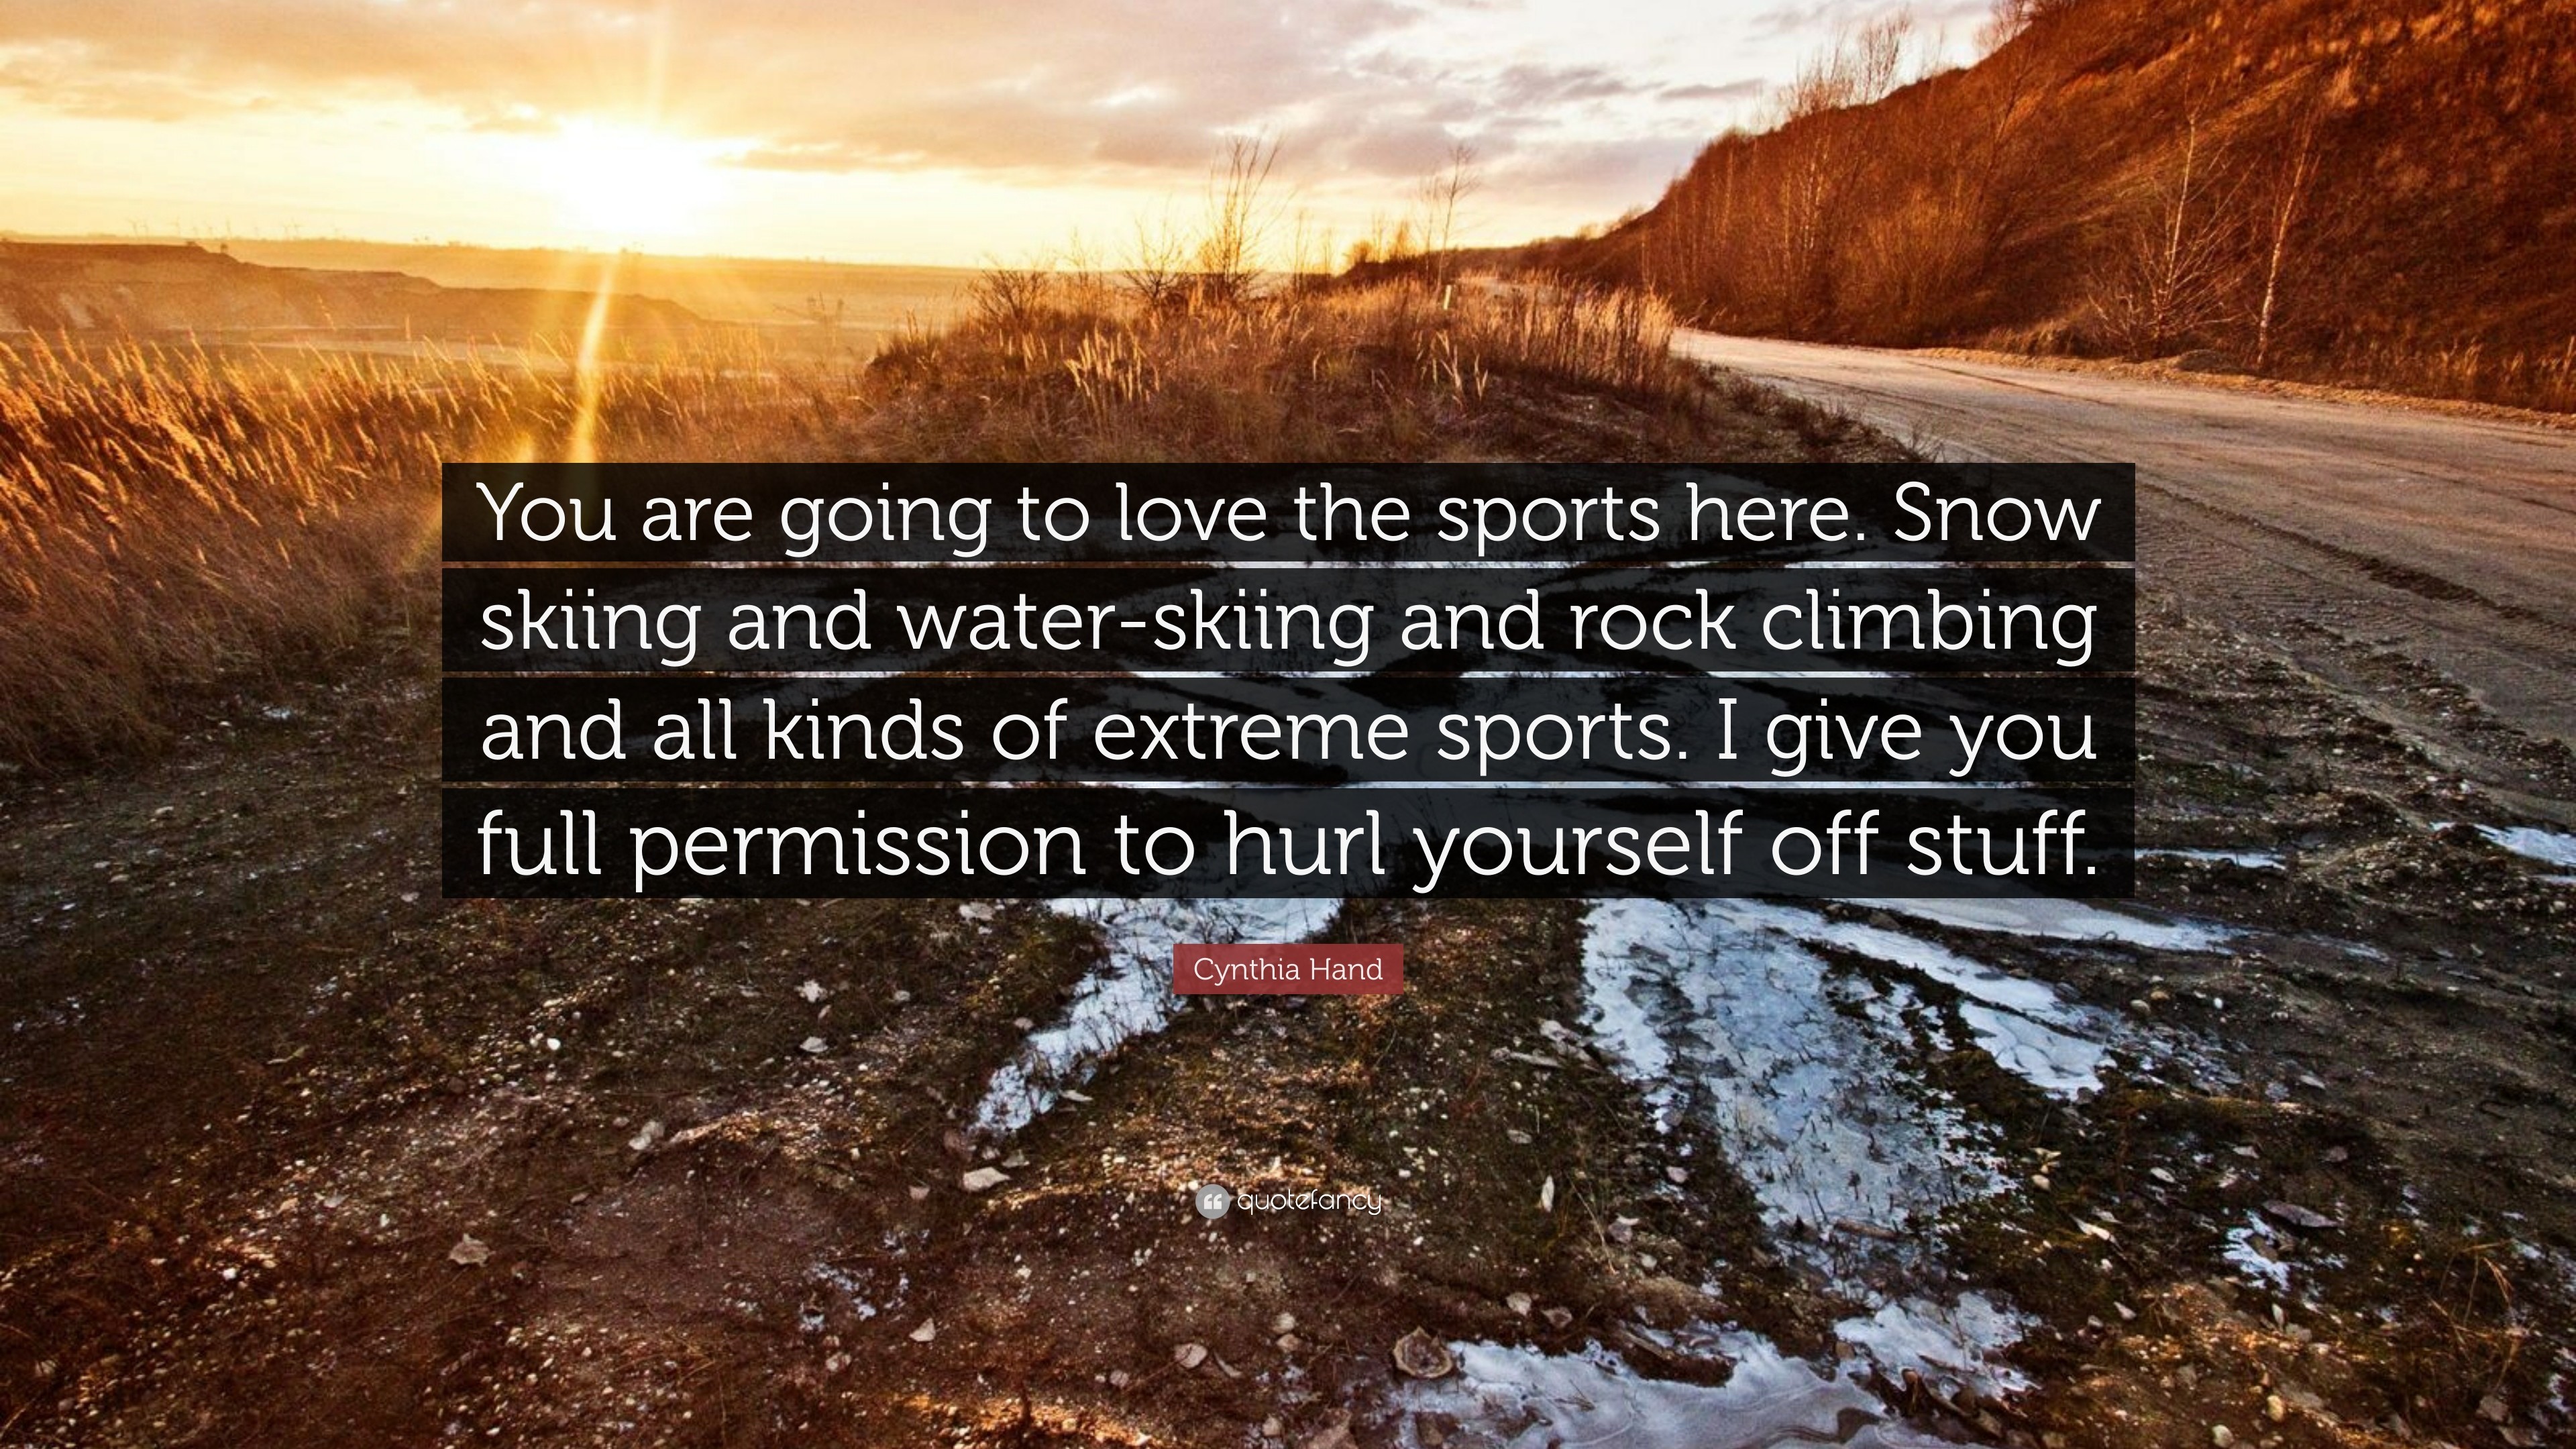 3840x2160 Cynthia Hand Quote: “You are going to love the sports here. Snow skiing